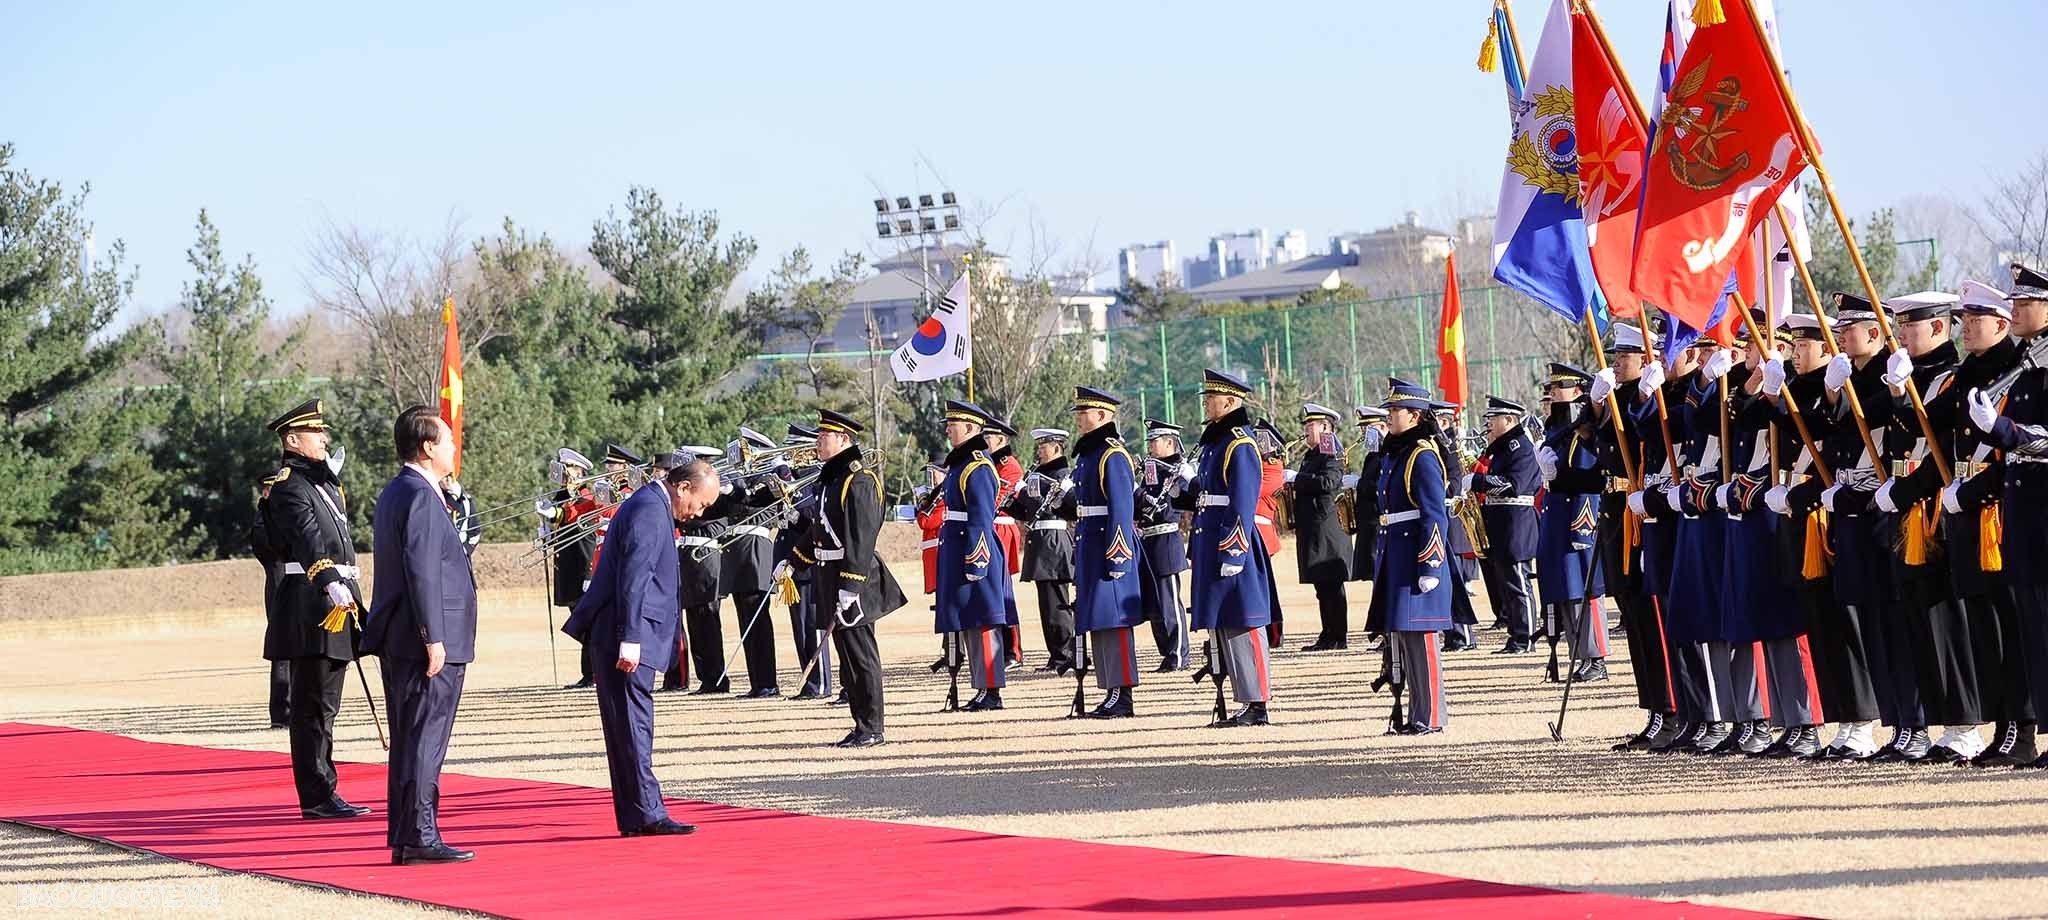 Official welcome ceremony held for President Nguyen Xuan Phuc in RoK